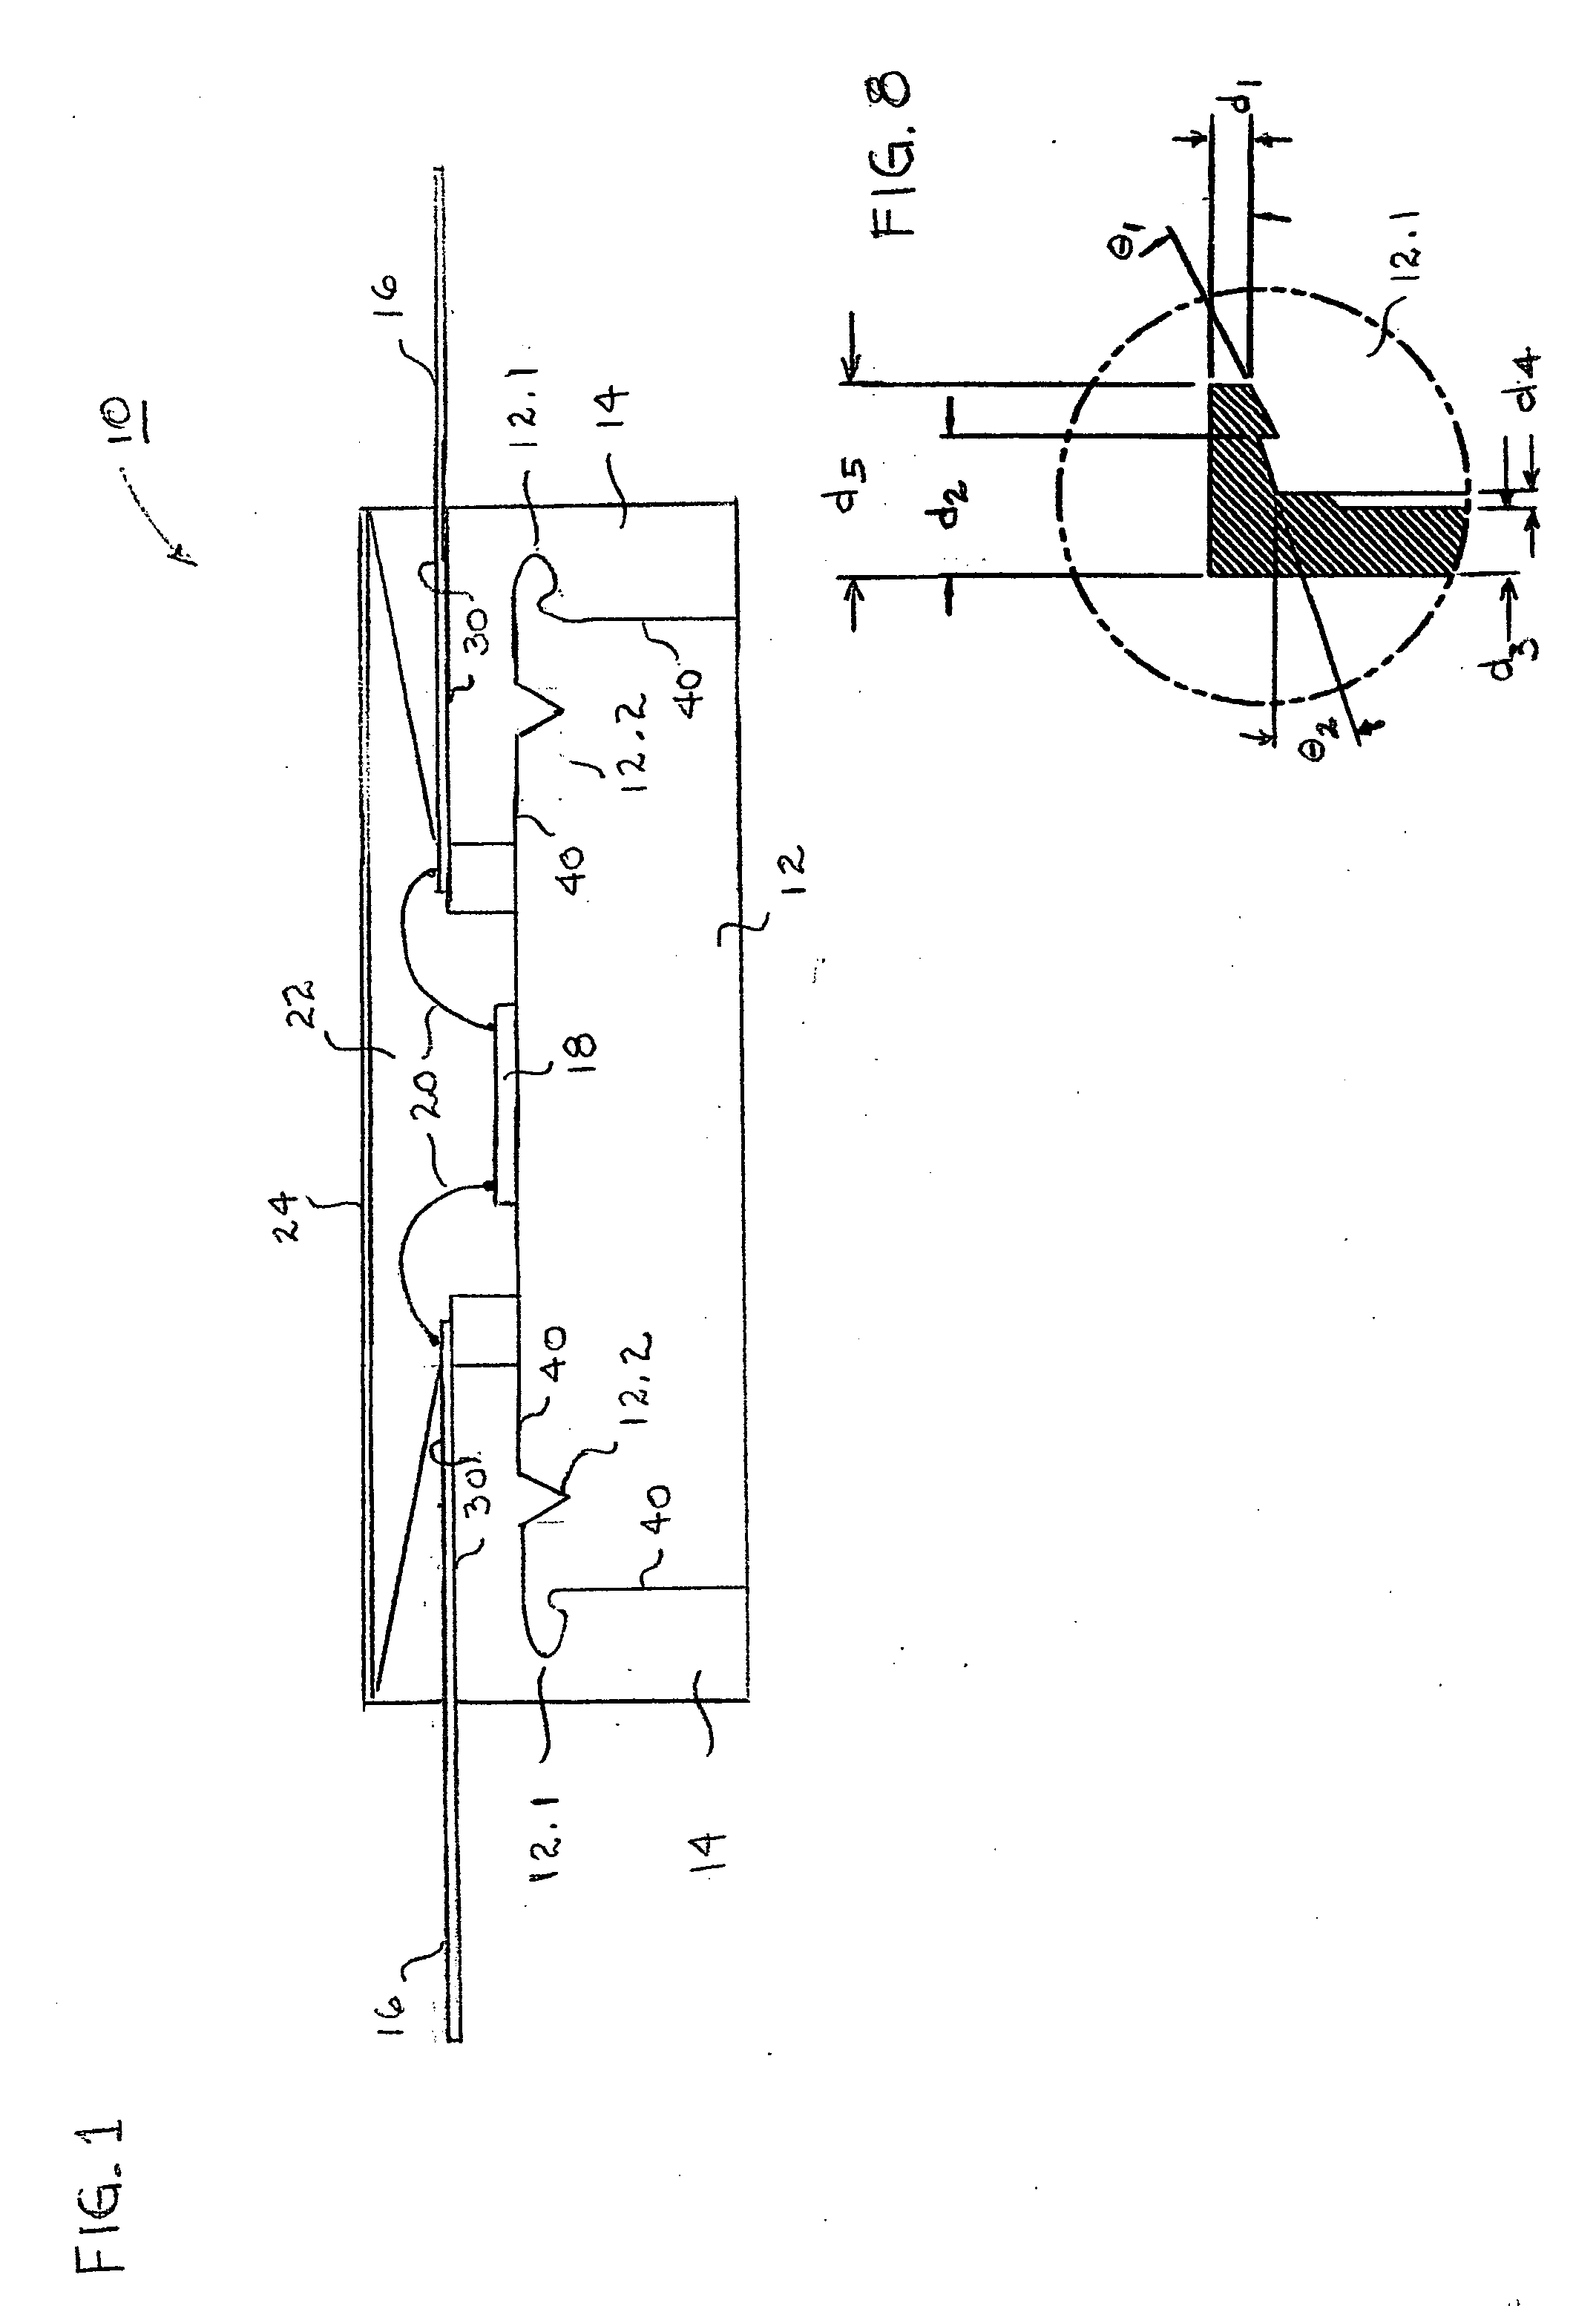 Semiconductor device package with base features to reduce leakage